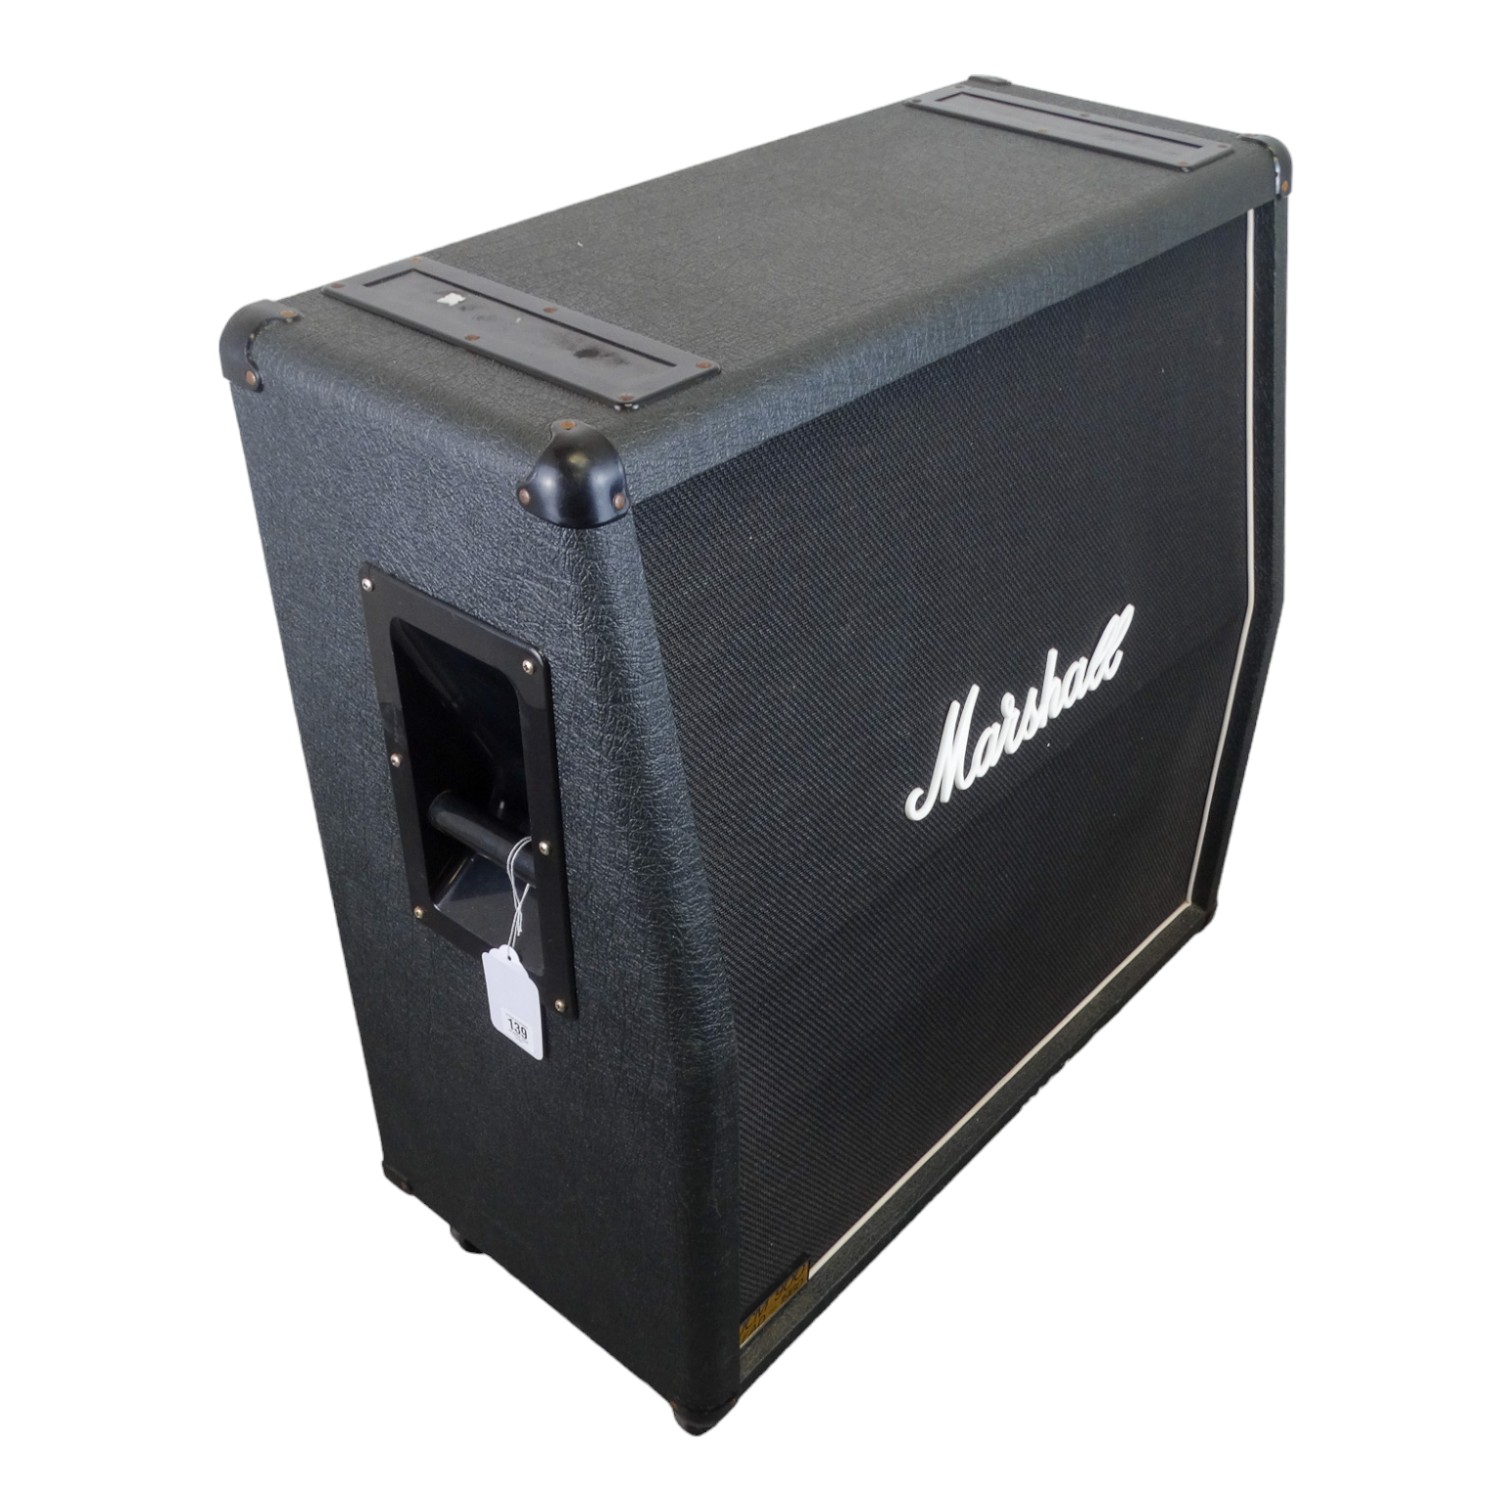 A Marshall lead amplifier speaker - JMC 900, circa 1990's in a re-issue '60's style. - Bild 6 aus 6